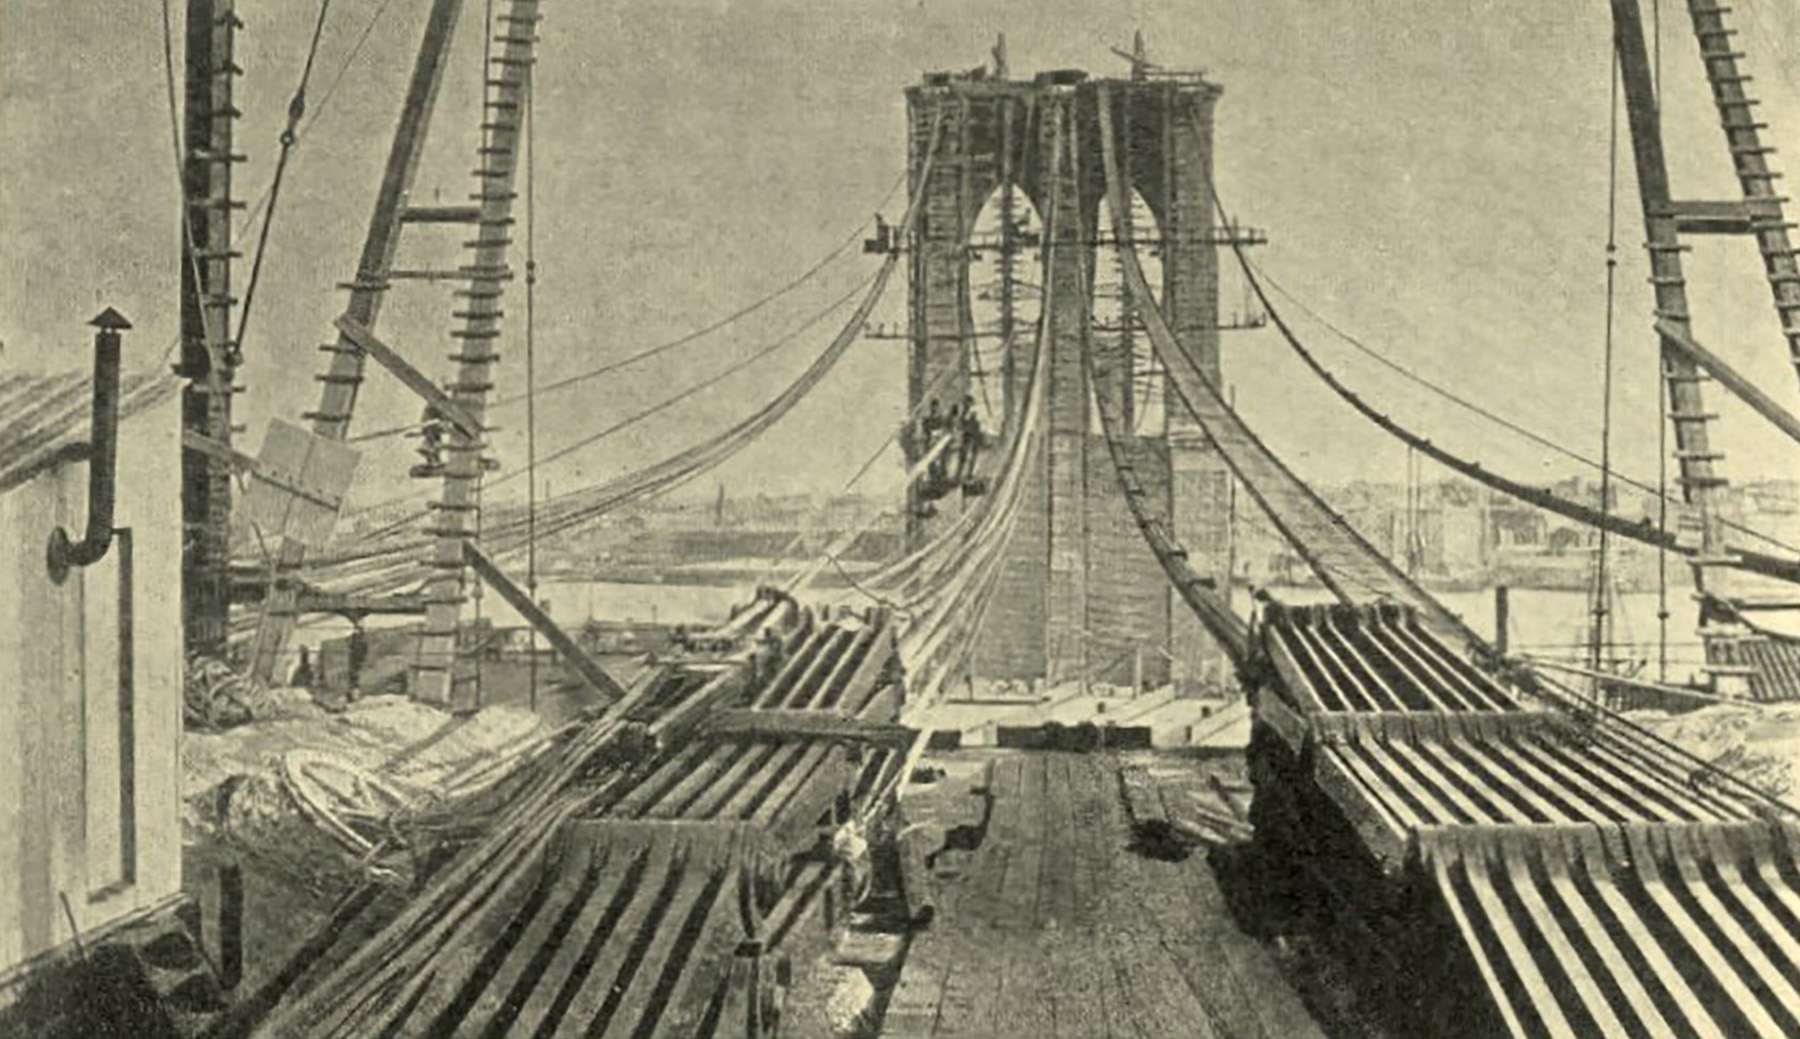 Black and white photograph of the Brooklyn Bridge showing it under construction. The laying of the cables is pictured.